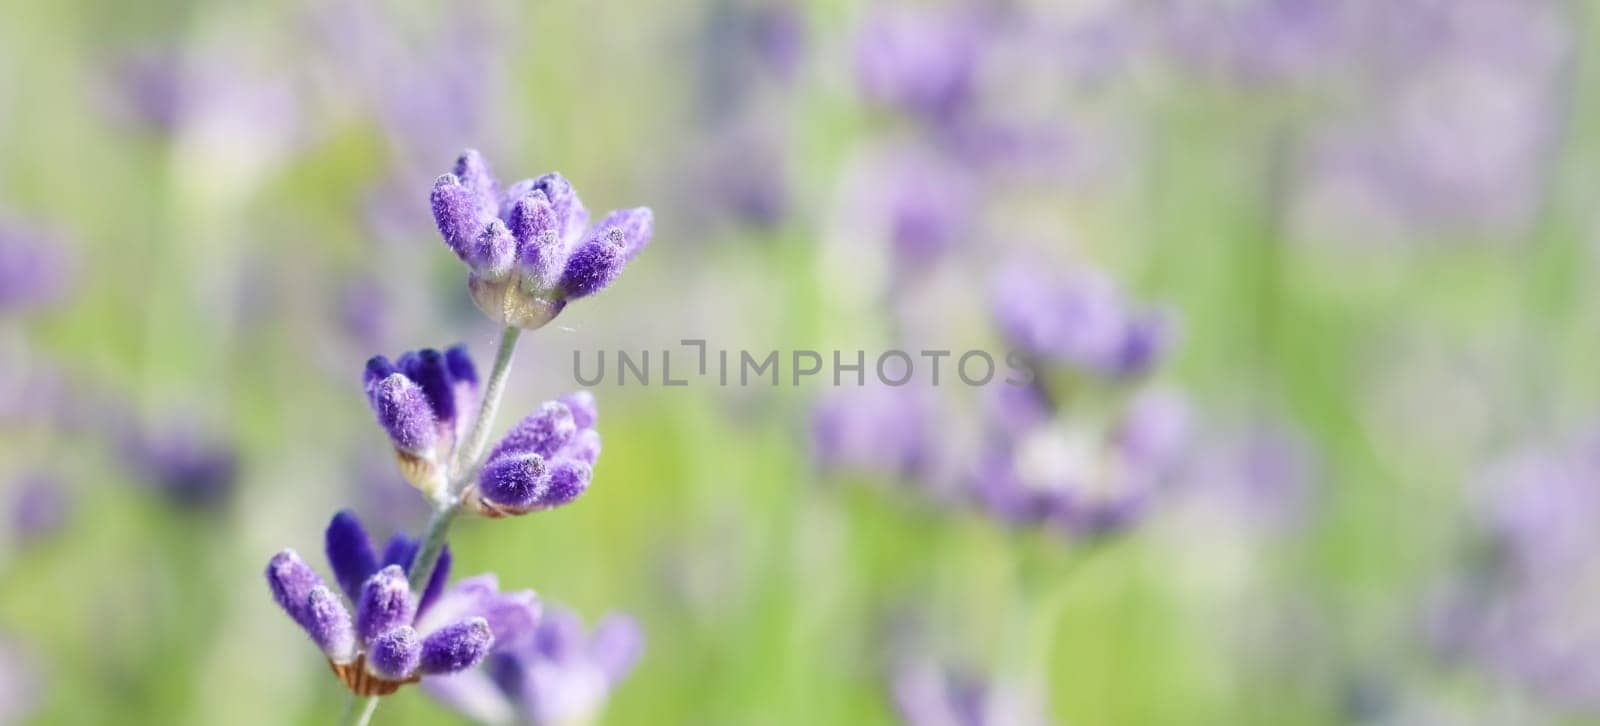 Lavender flowers blooming in the garden with blurred background. by Olayola